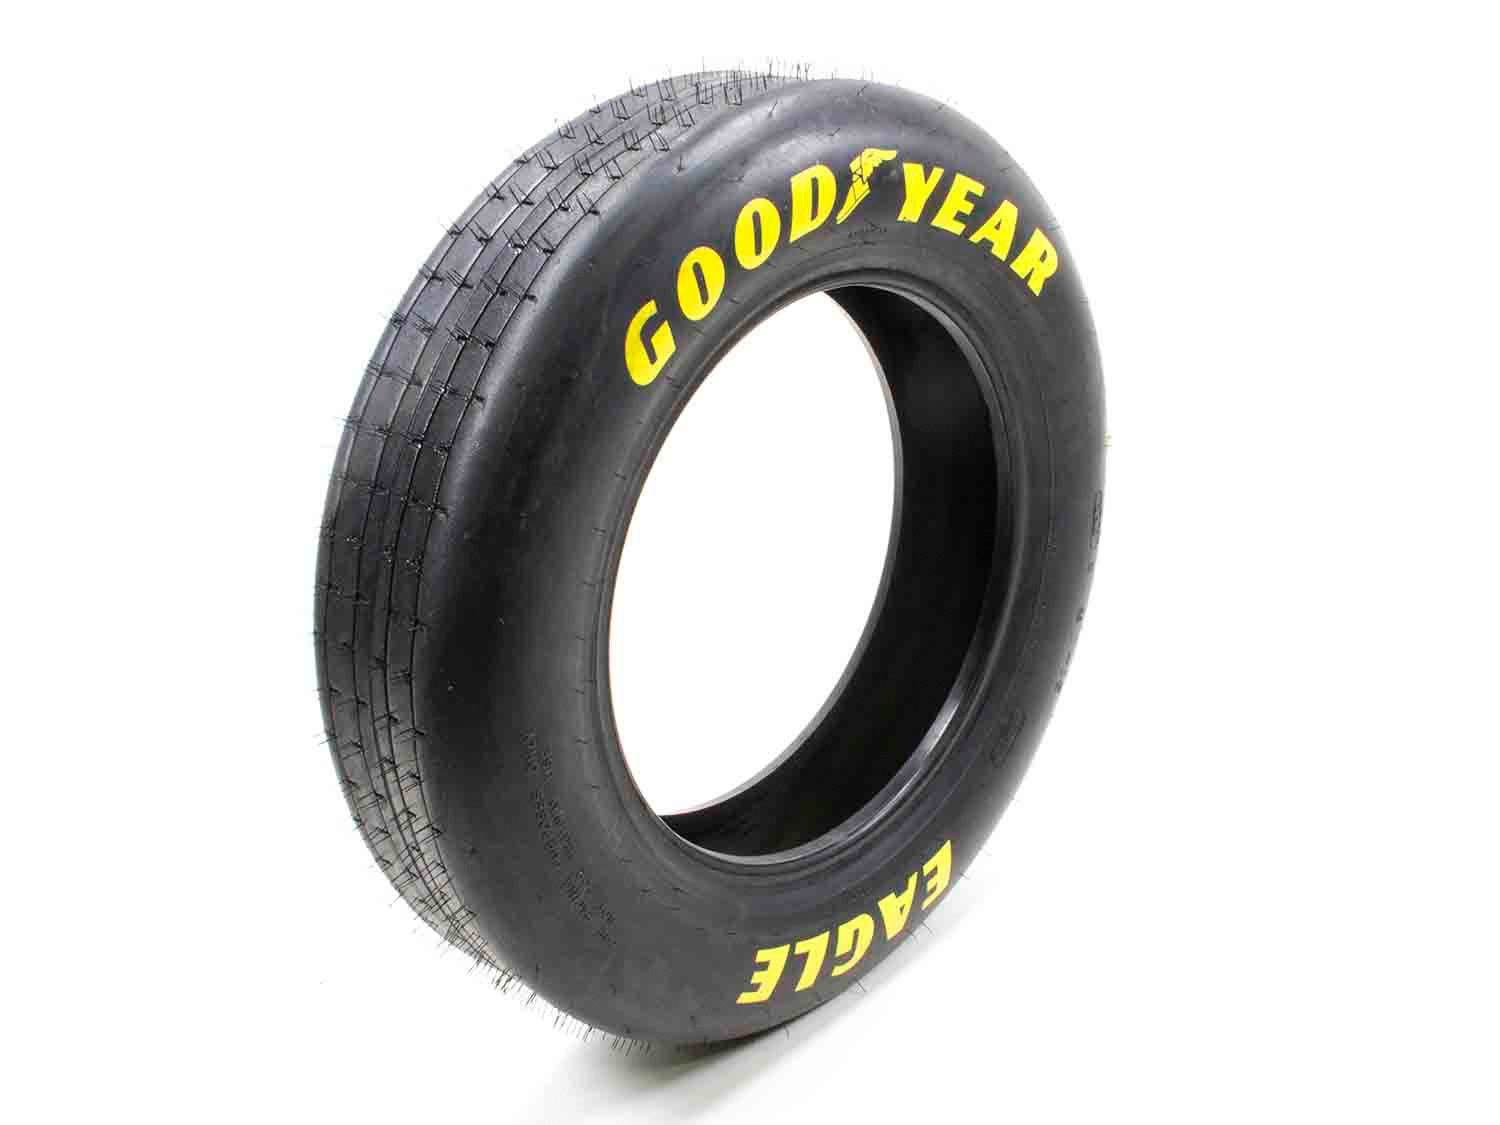 Goodyear 25.0/4.5-15 Front Runner GDYD2991